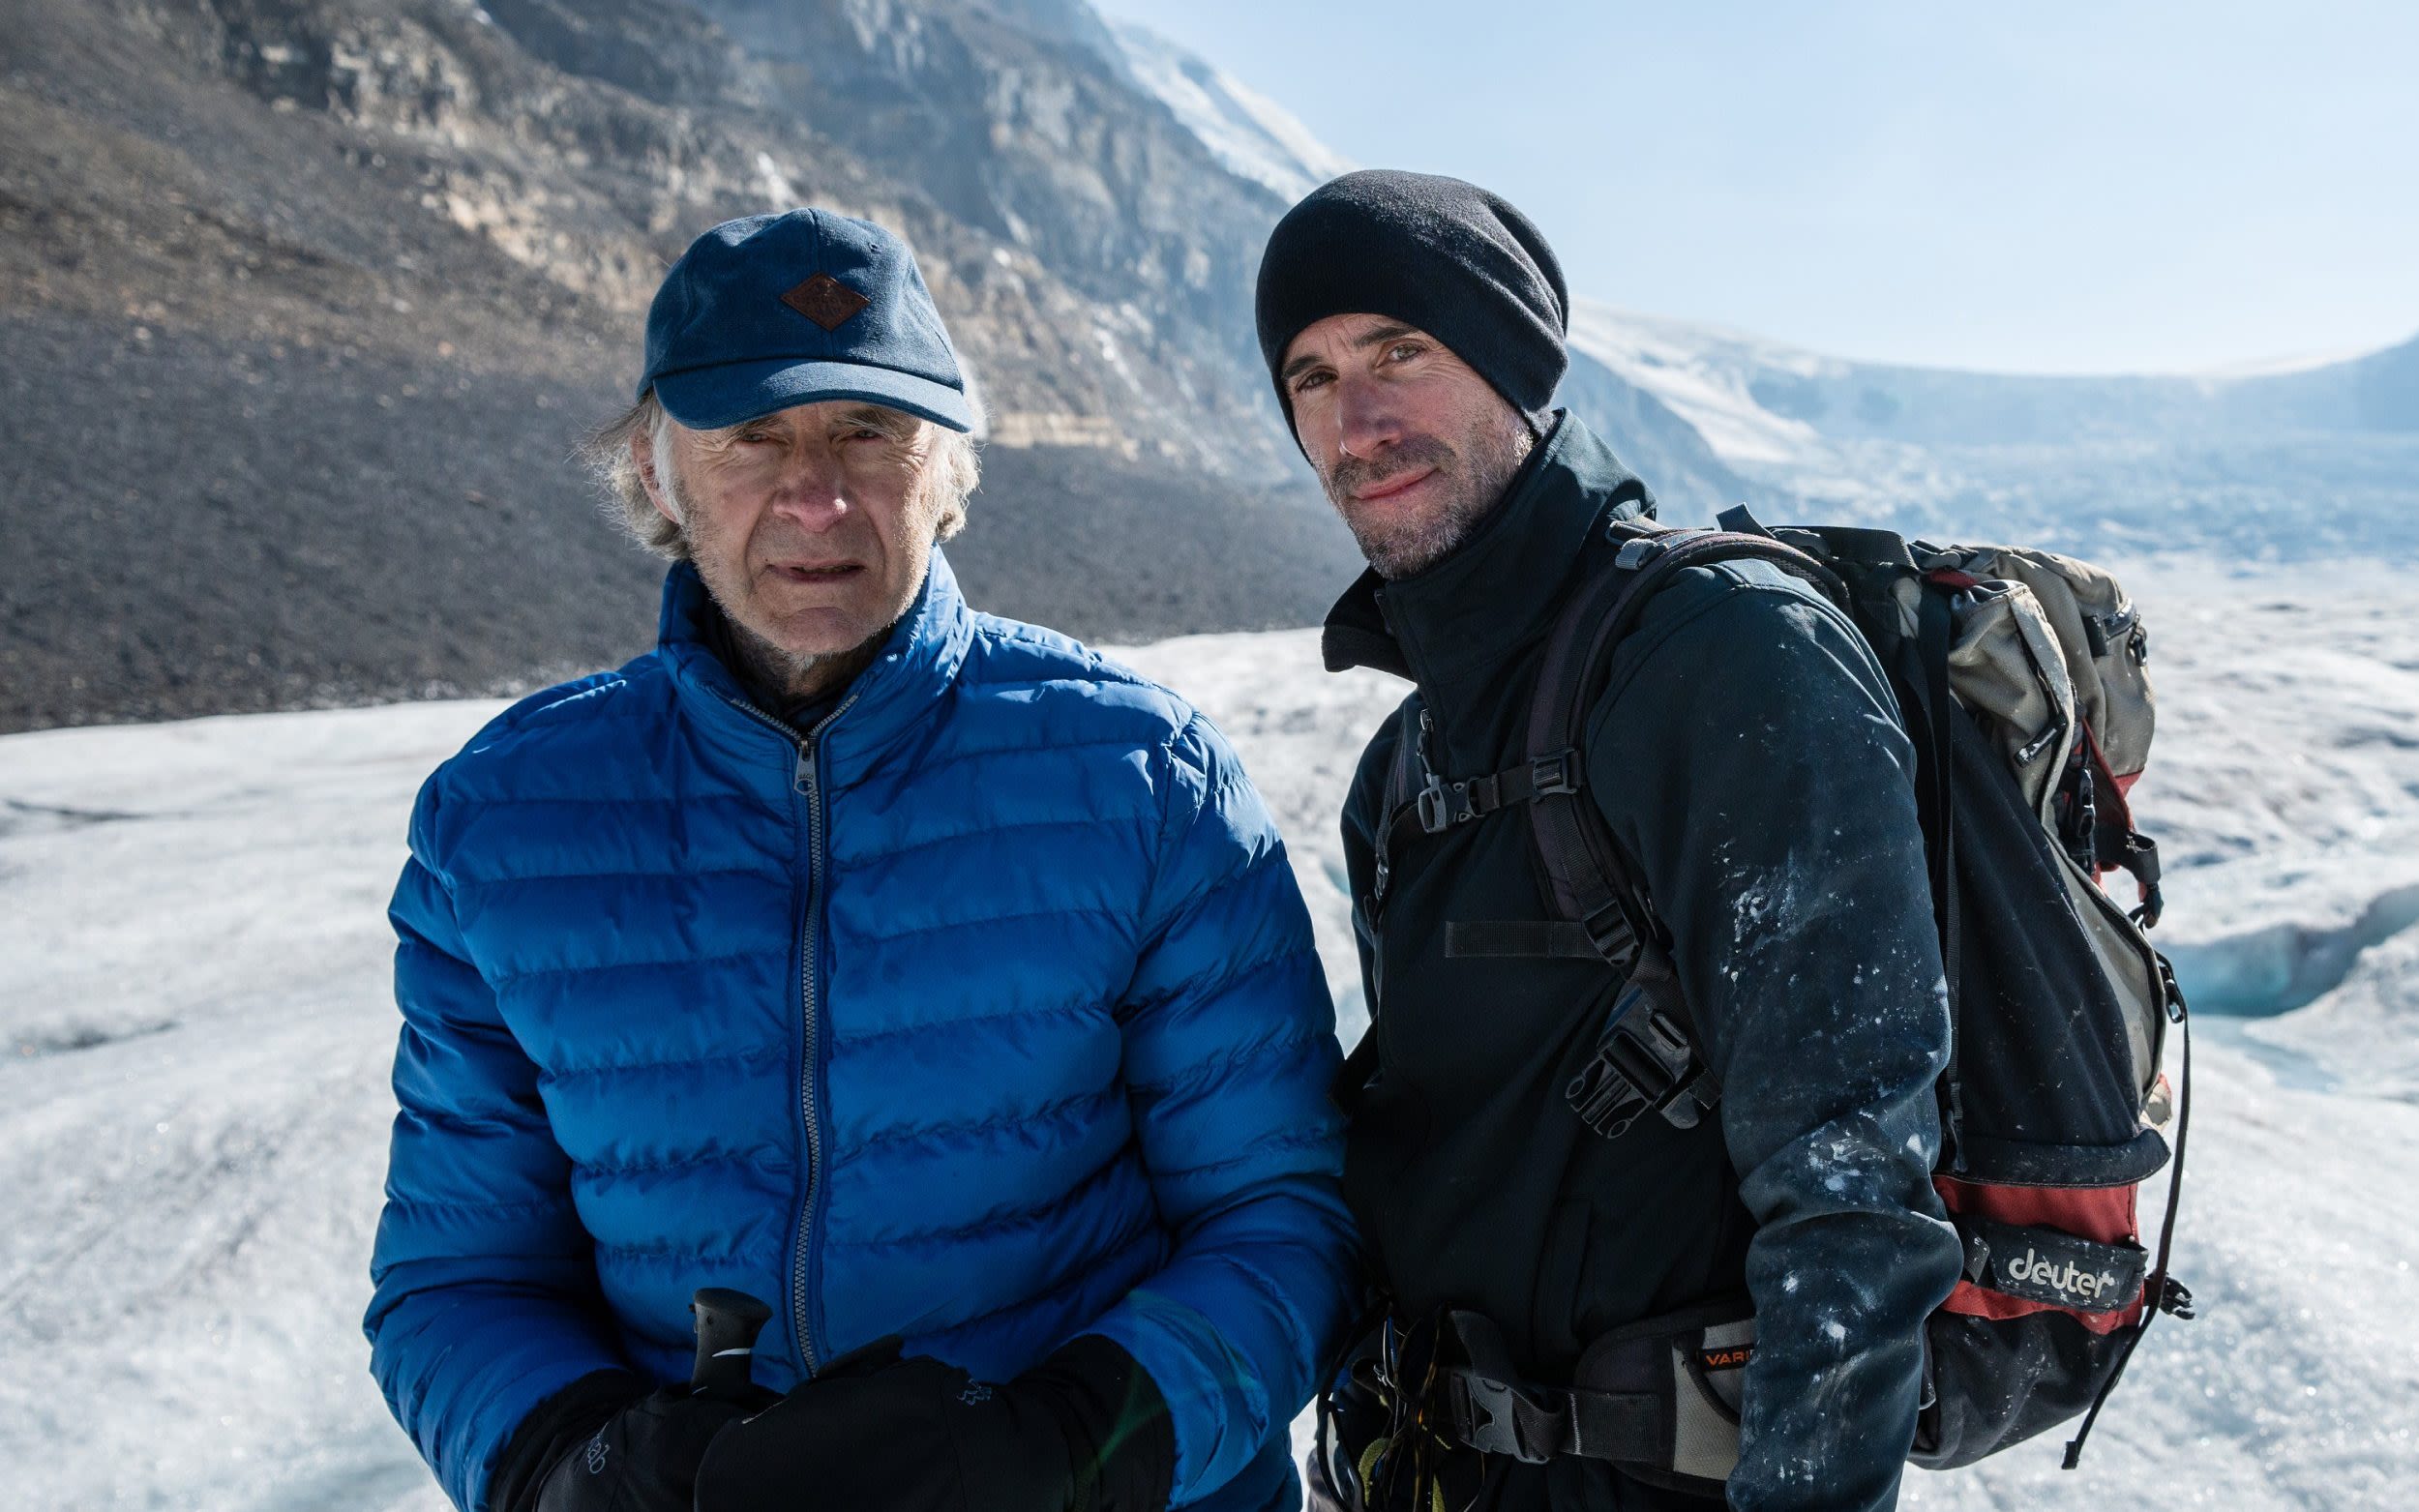 Fiennes: Return to the Wild, review: odd-couple adventure bridges two very different family members